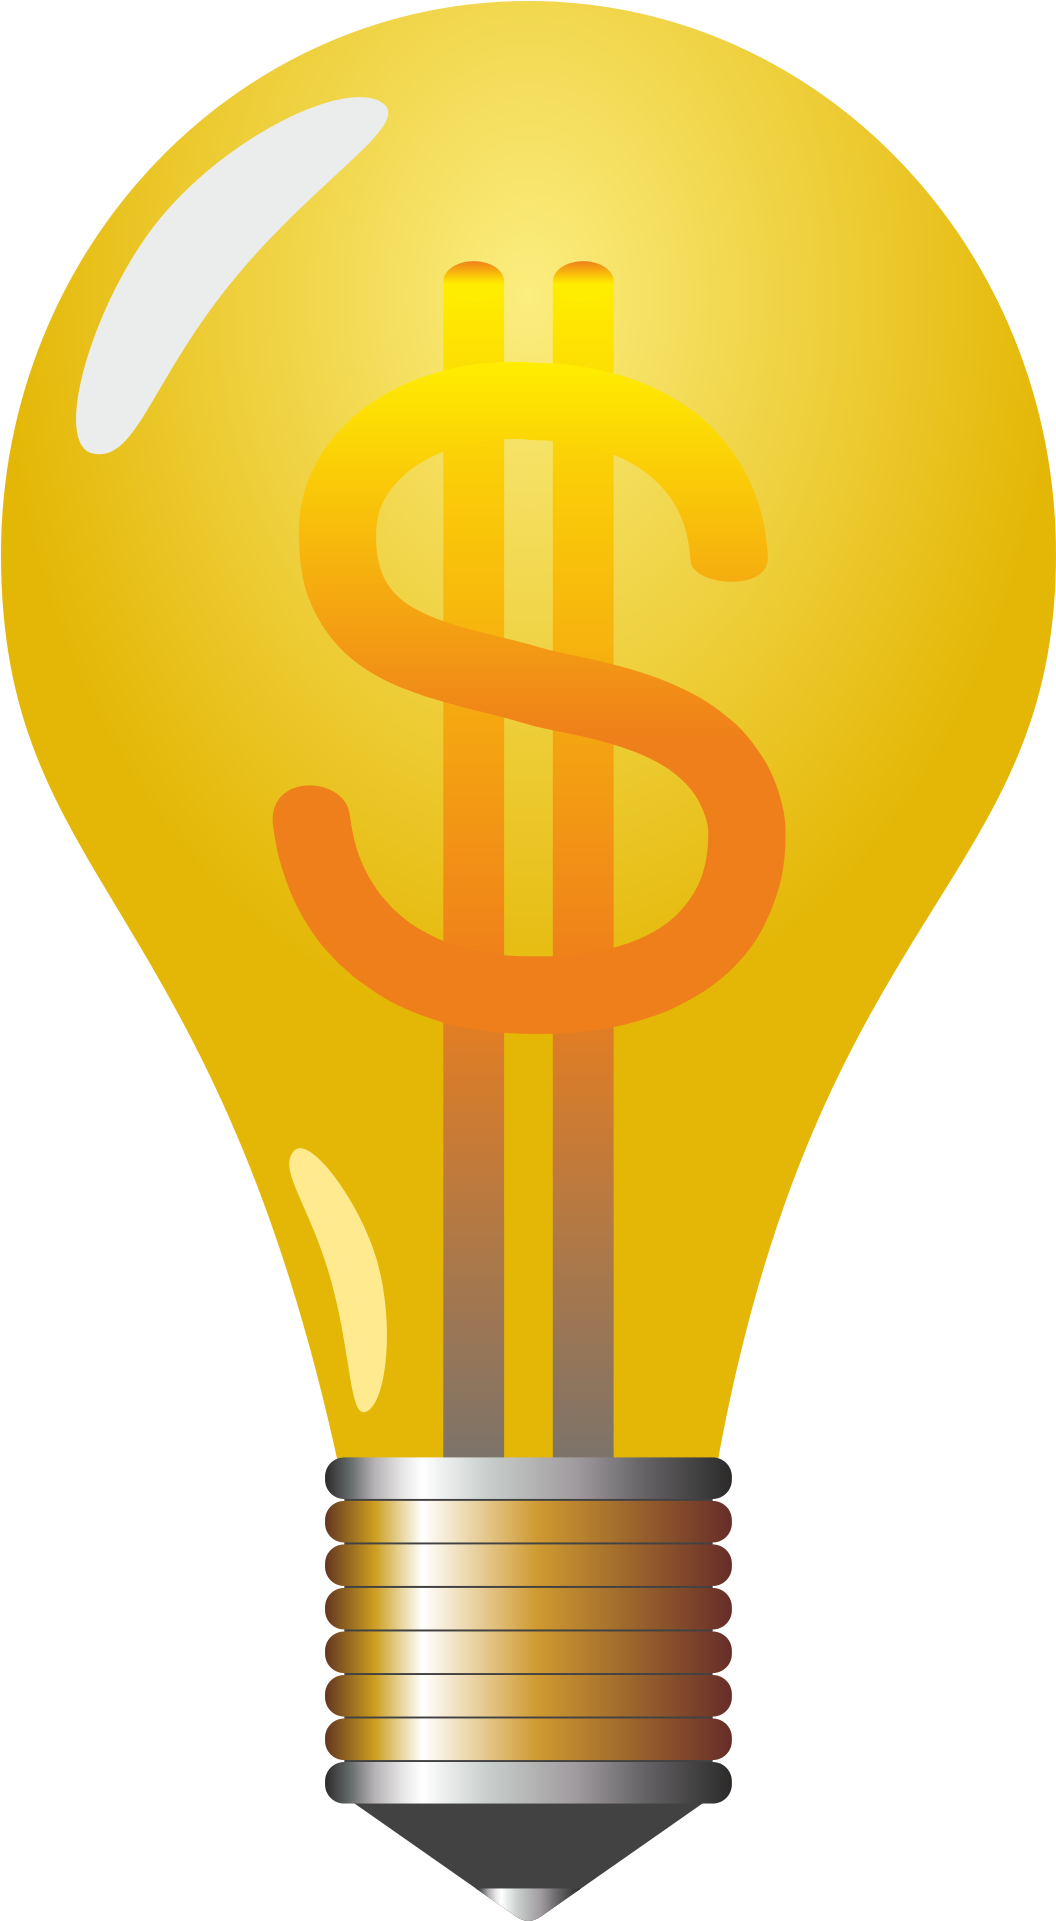 Light Bulb Clipart Importance Pencil And In Color Light - Lamp (1920x1920)